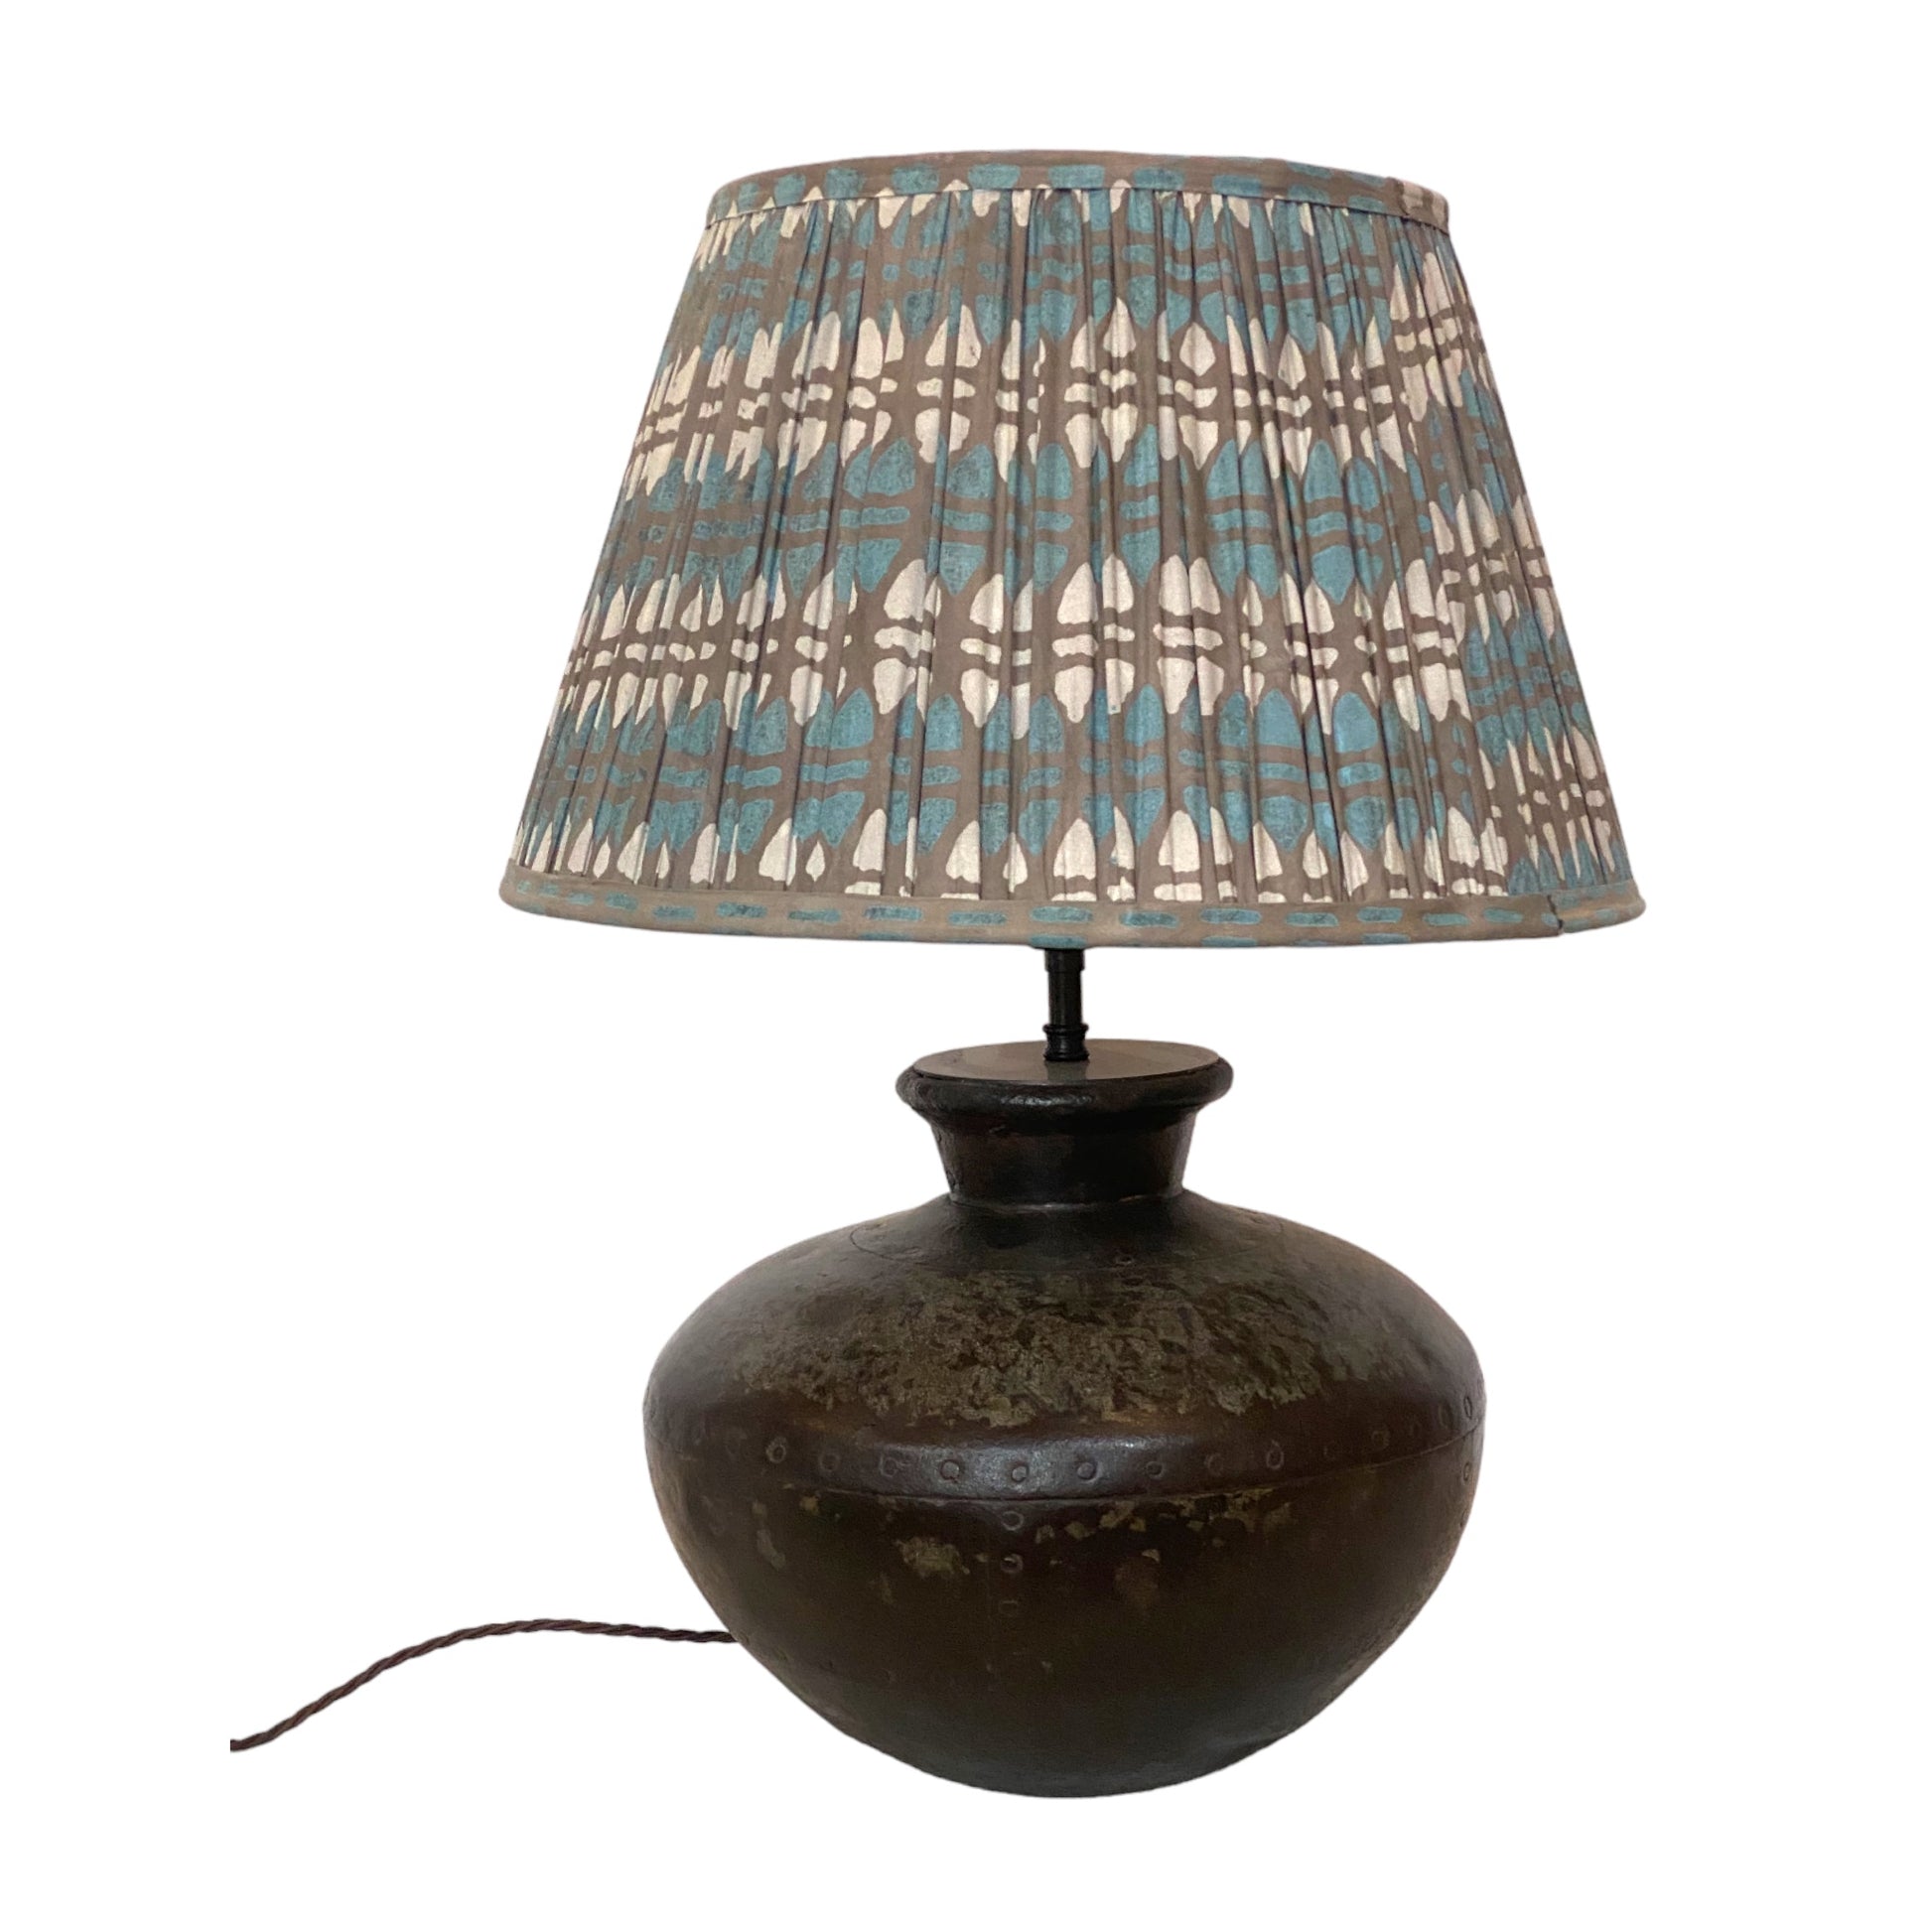 Teal and grey acorn lampshade on Water carrier lamp